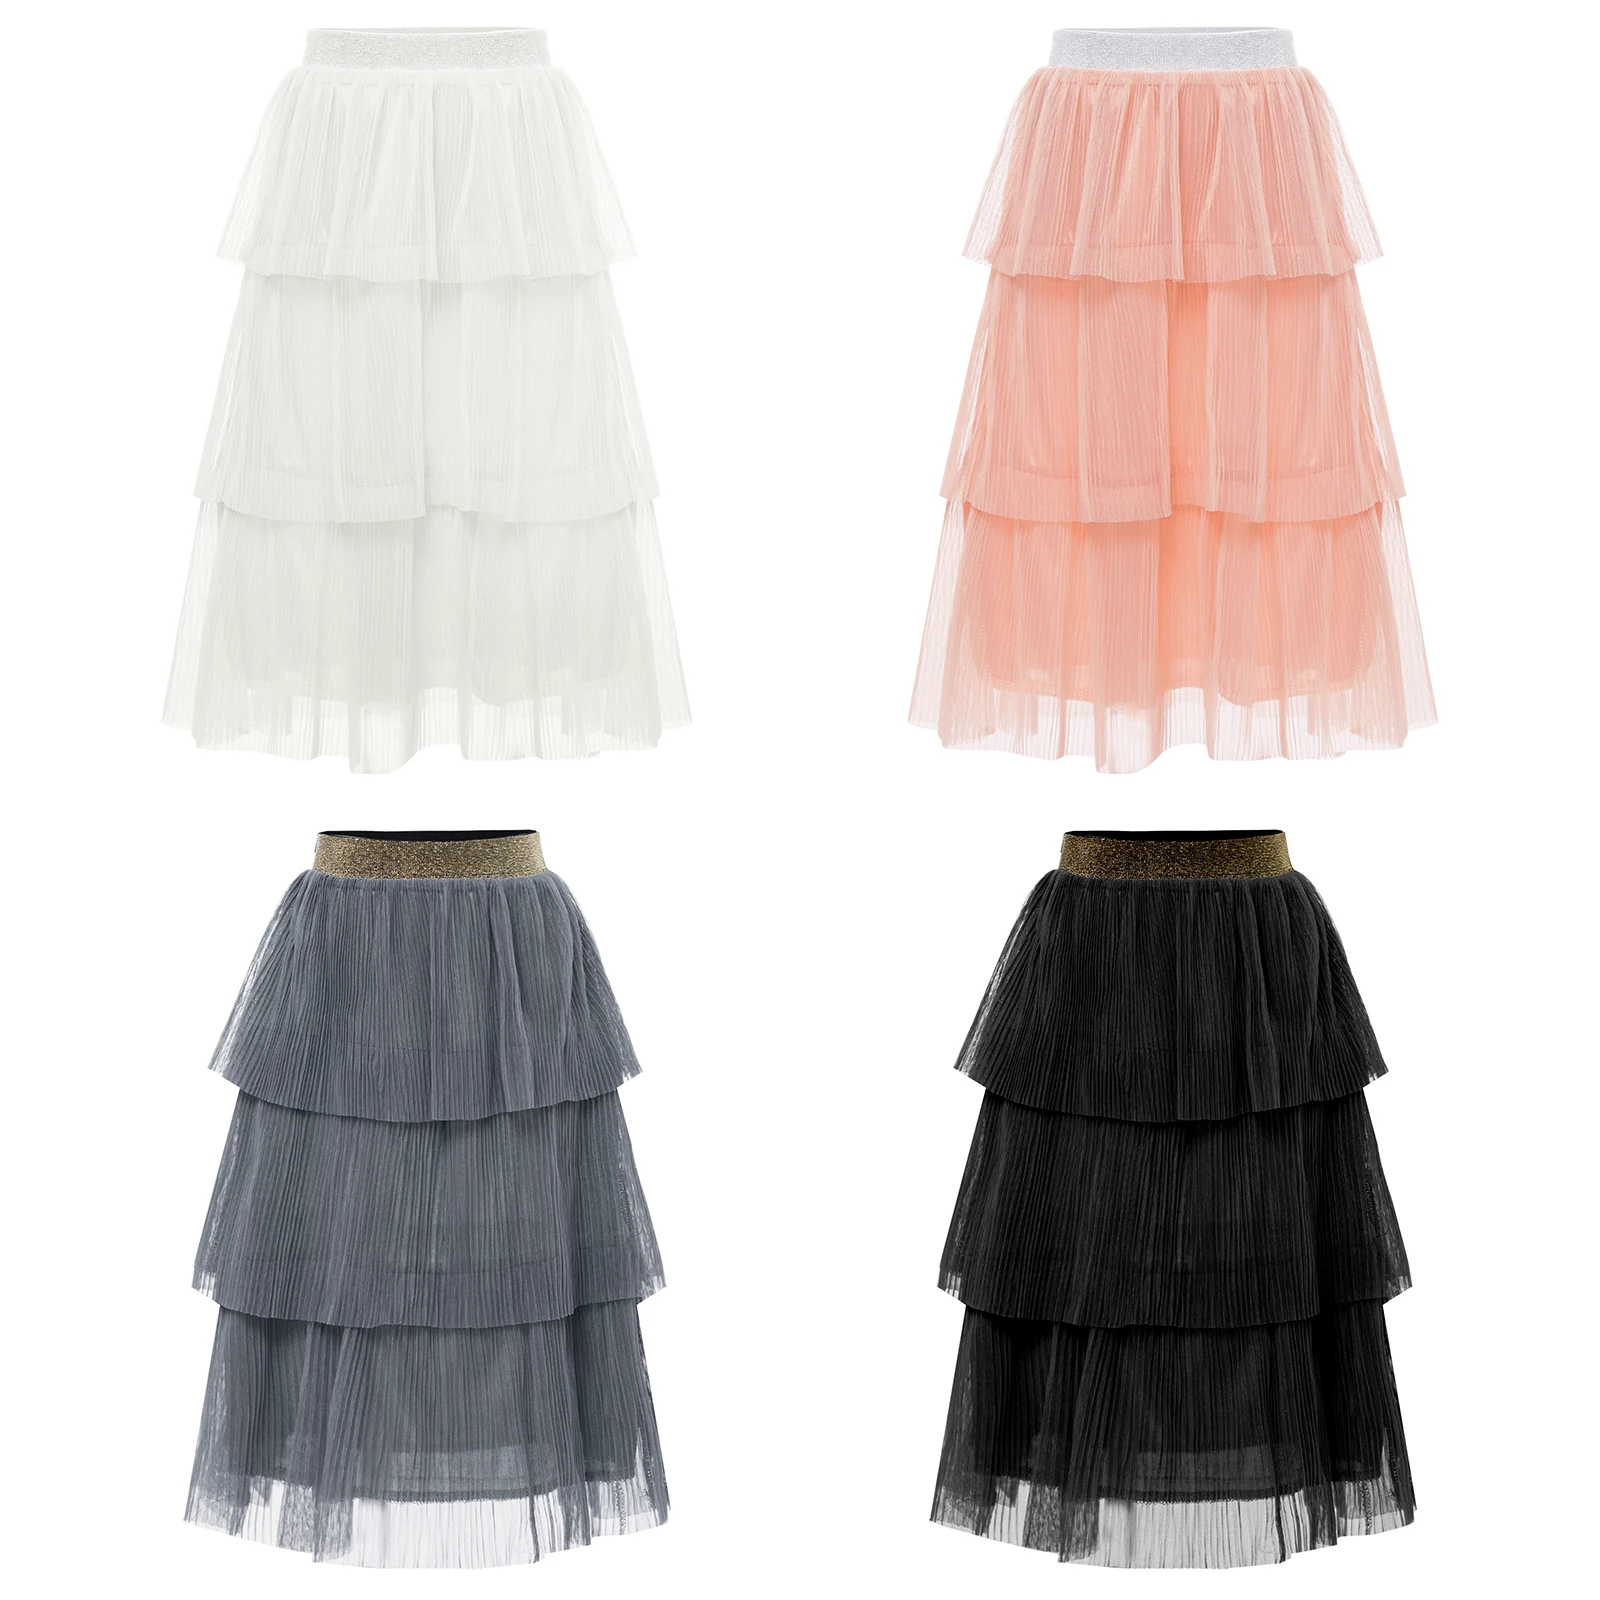 

HOT Fashion Kids Girls Tutu Skirts Elastic Waistband Solid Color Layered Ballet Tutu Tulle Skirt for Party Princess Gown Clothes